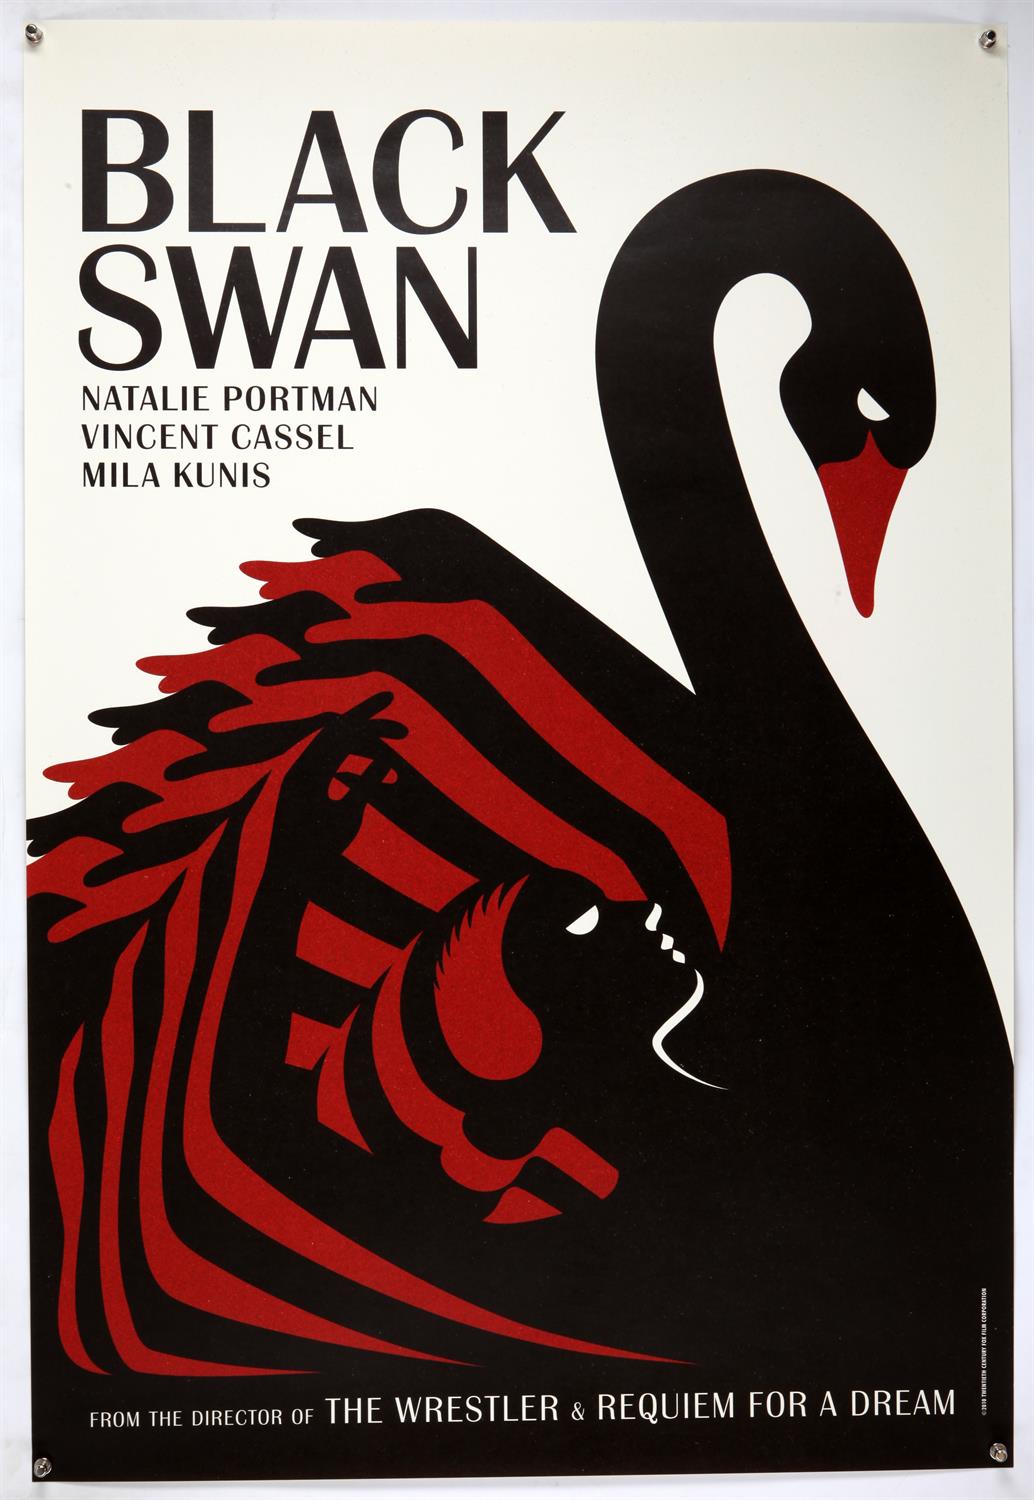 Black Swan (2010) Four Advance One Sheet film posters by the London design firm La Boca, - Image 2 of 4